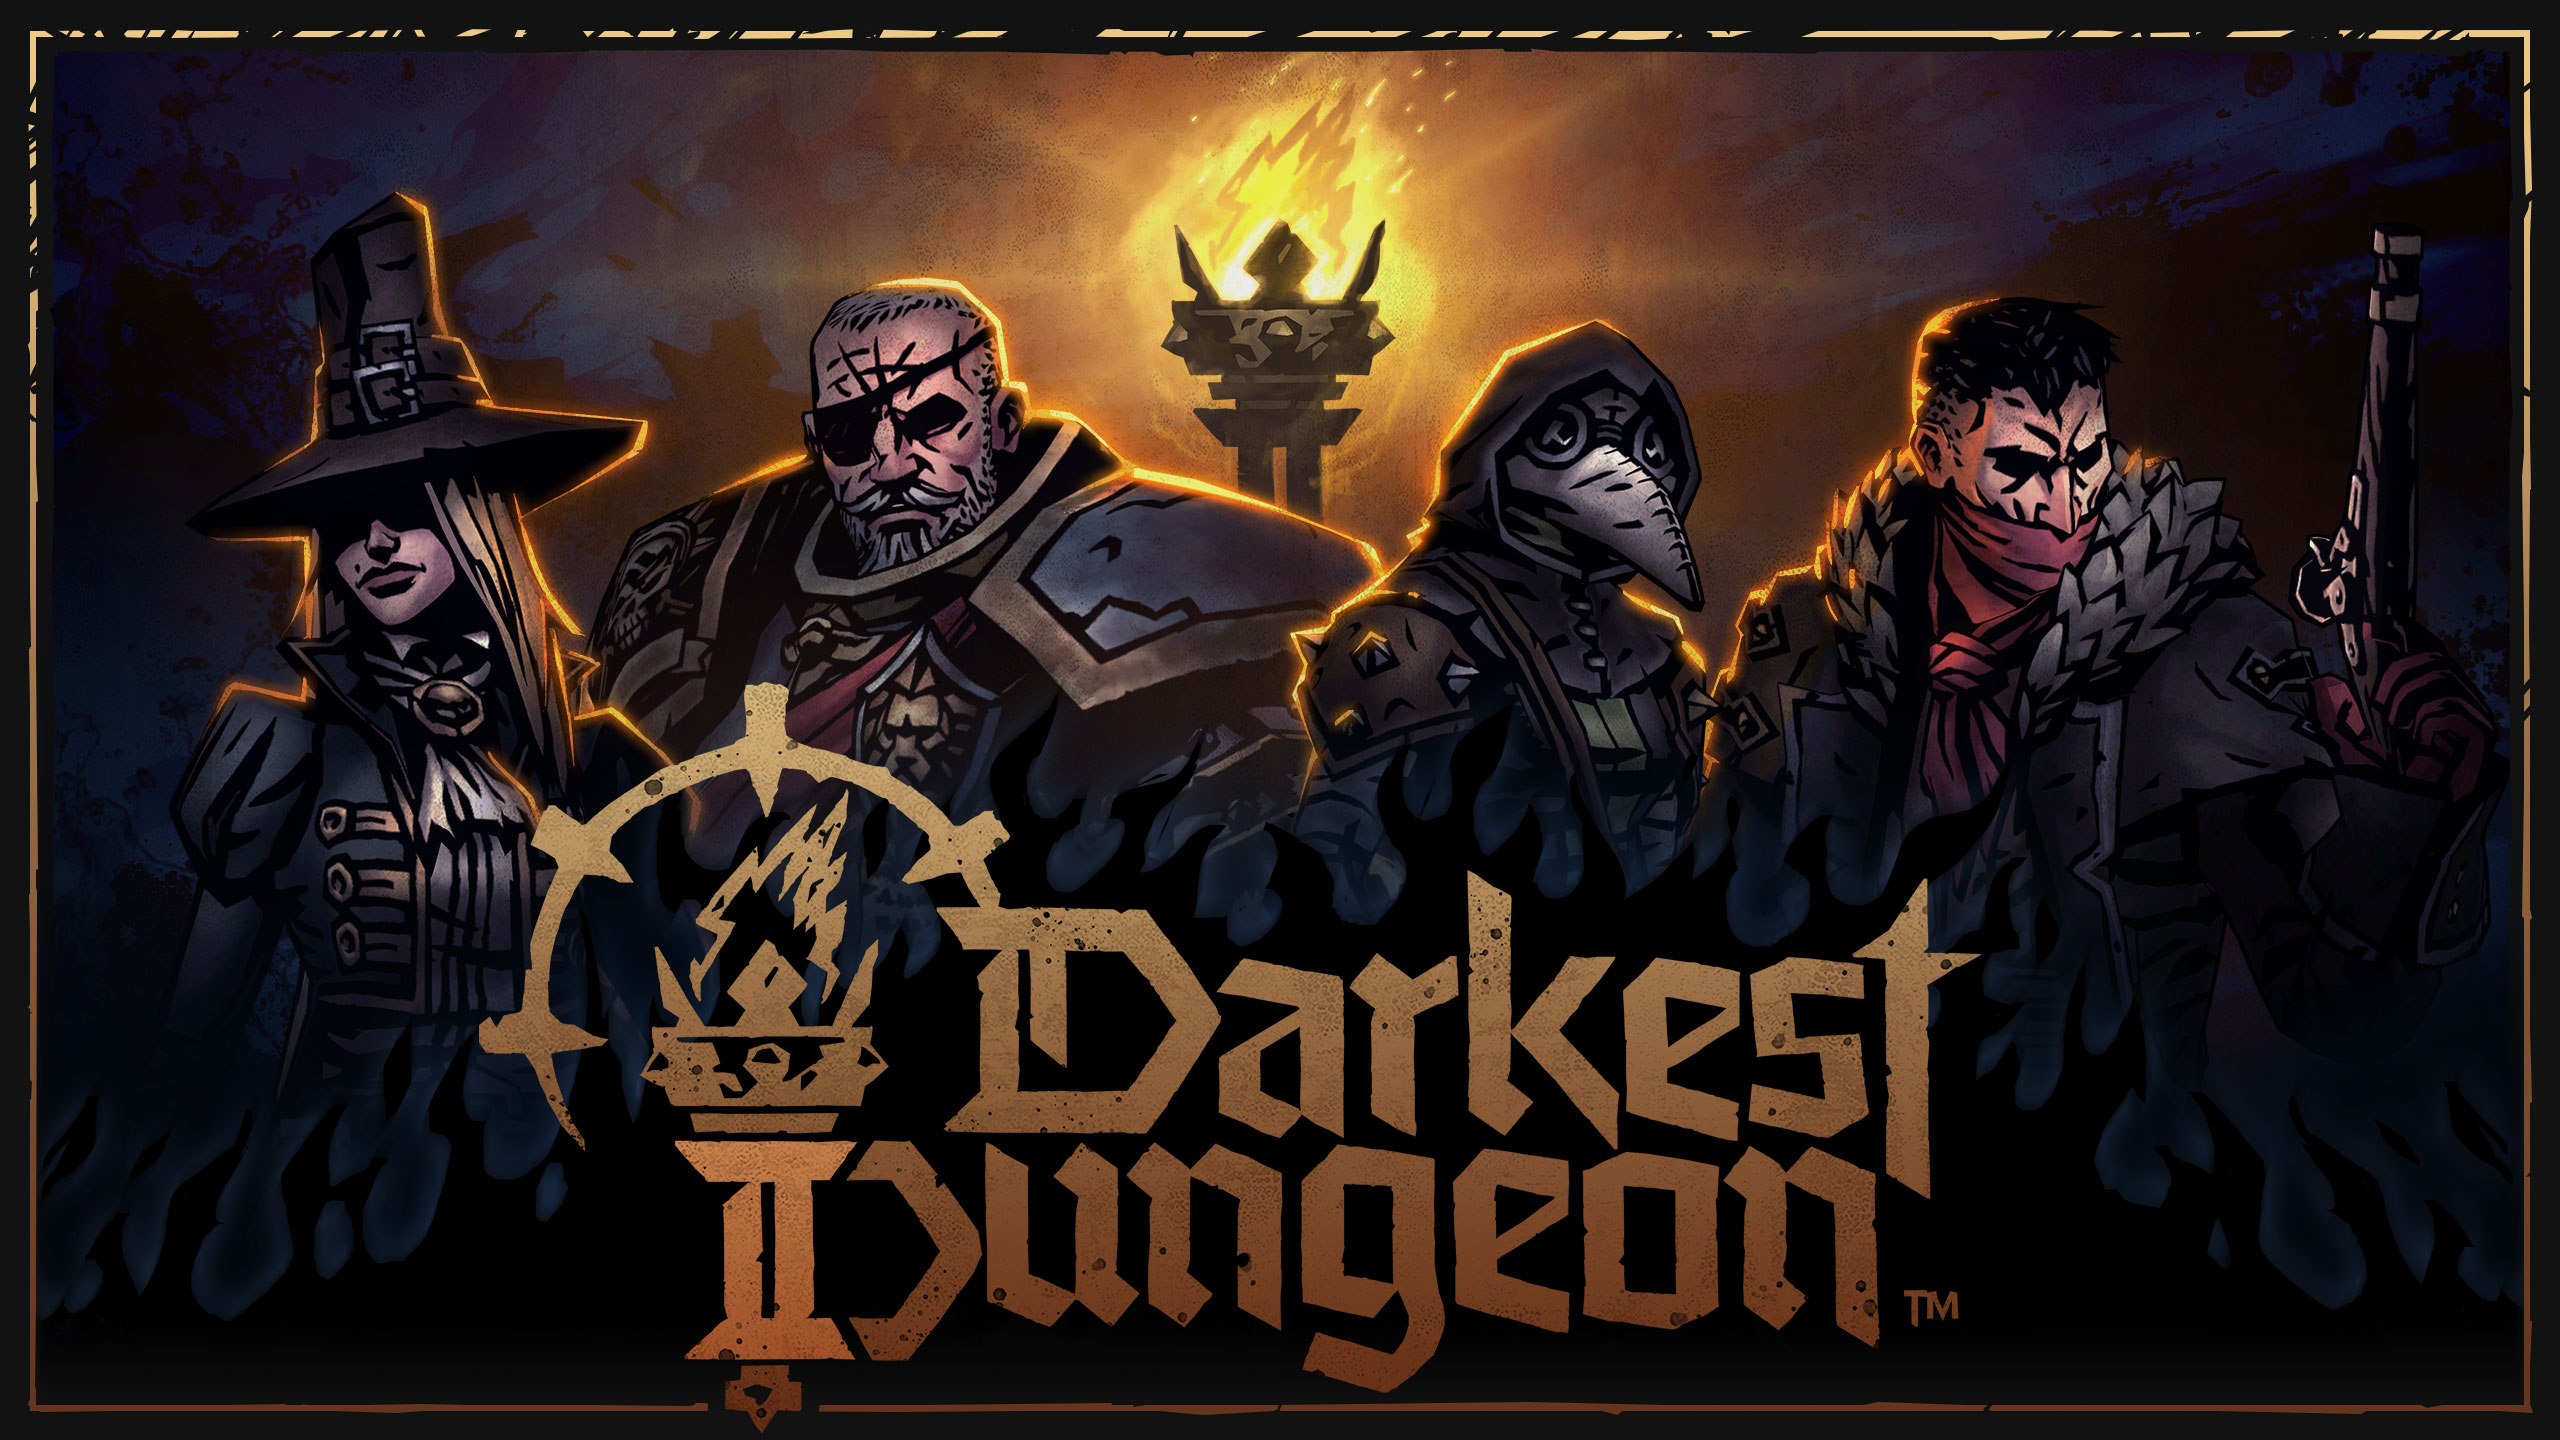 Darkest Dungeon 2 for Xbox, PlayStation and Switch may be released soon